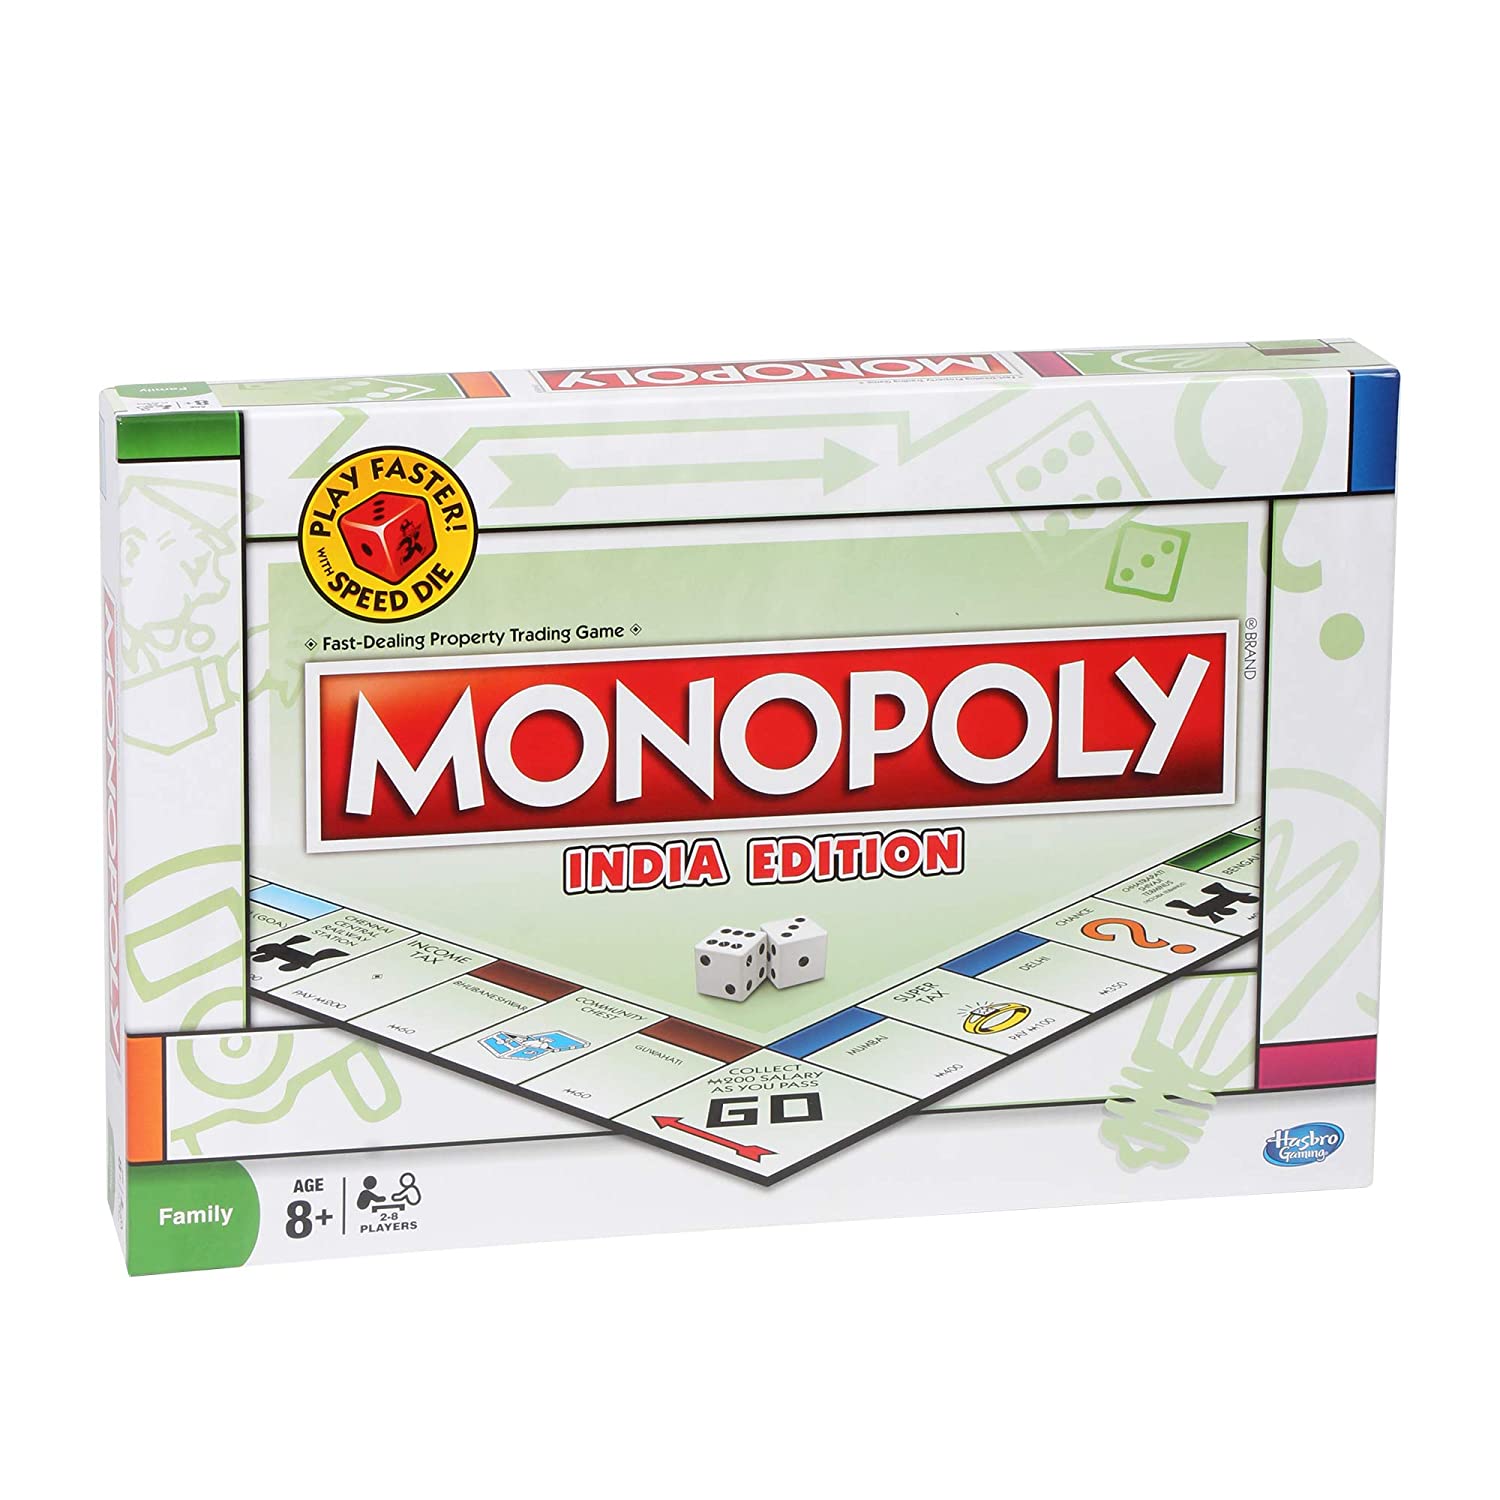 MONOPOLY India Edition - Ages 8 and Up